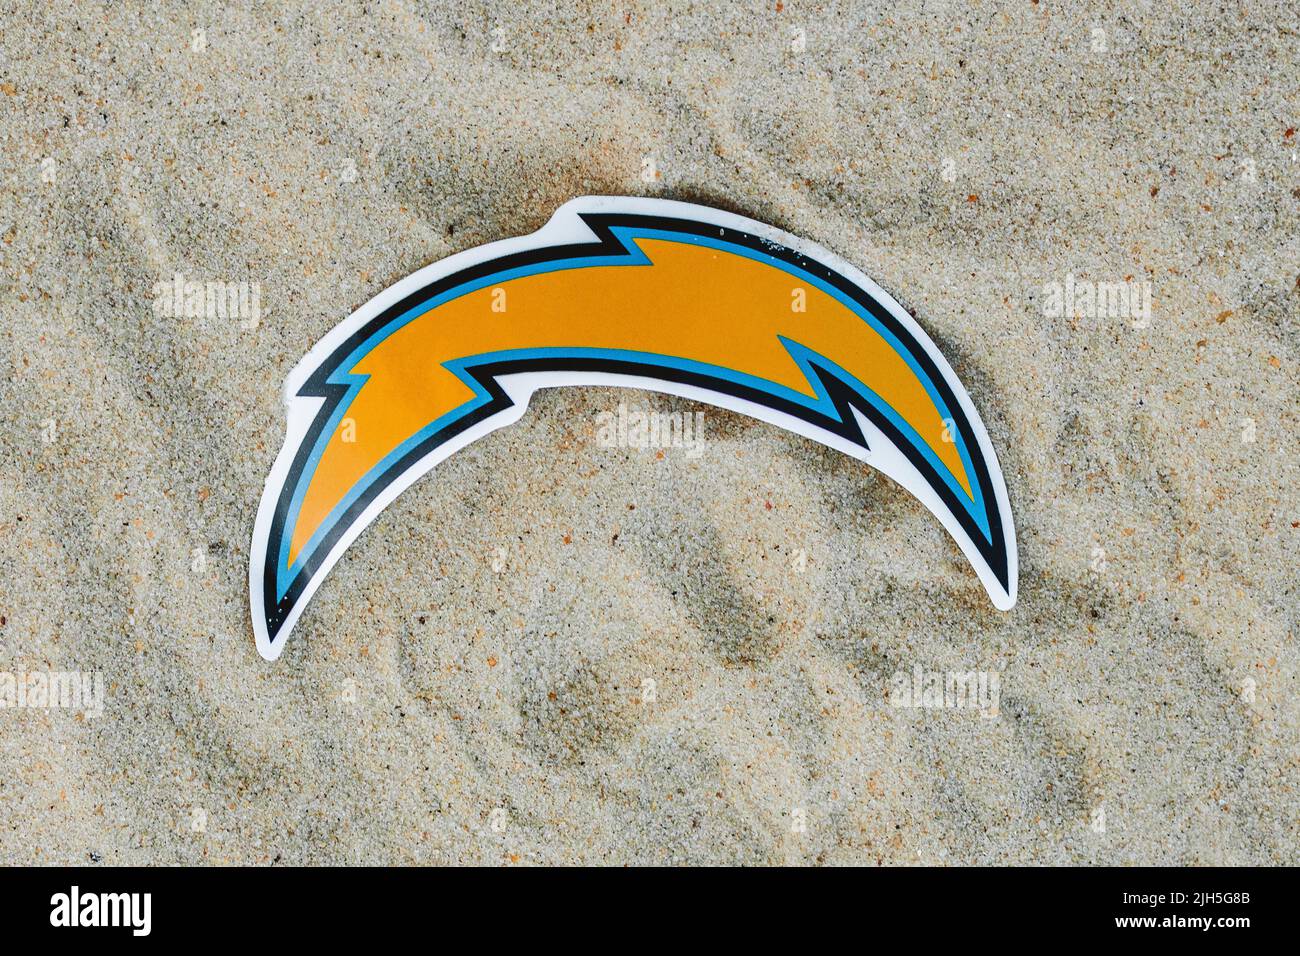 September 15, 2021, Moscow, Russia. The logo of the Los Angeles Chargers football club on the sand of the beach. Stock Photo